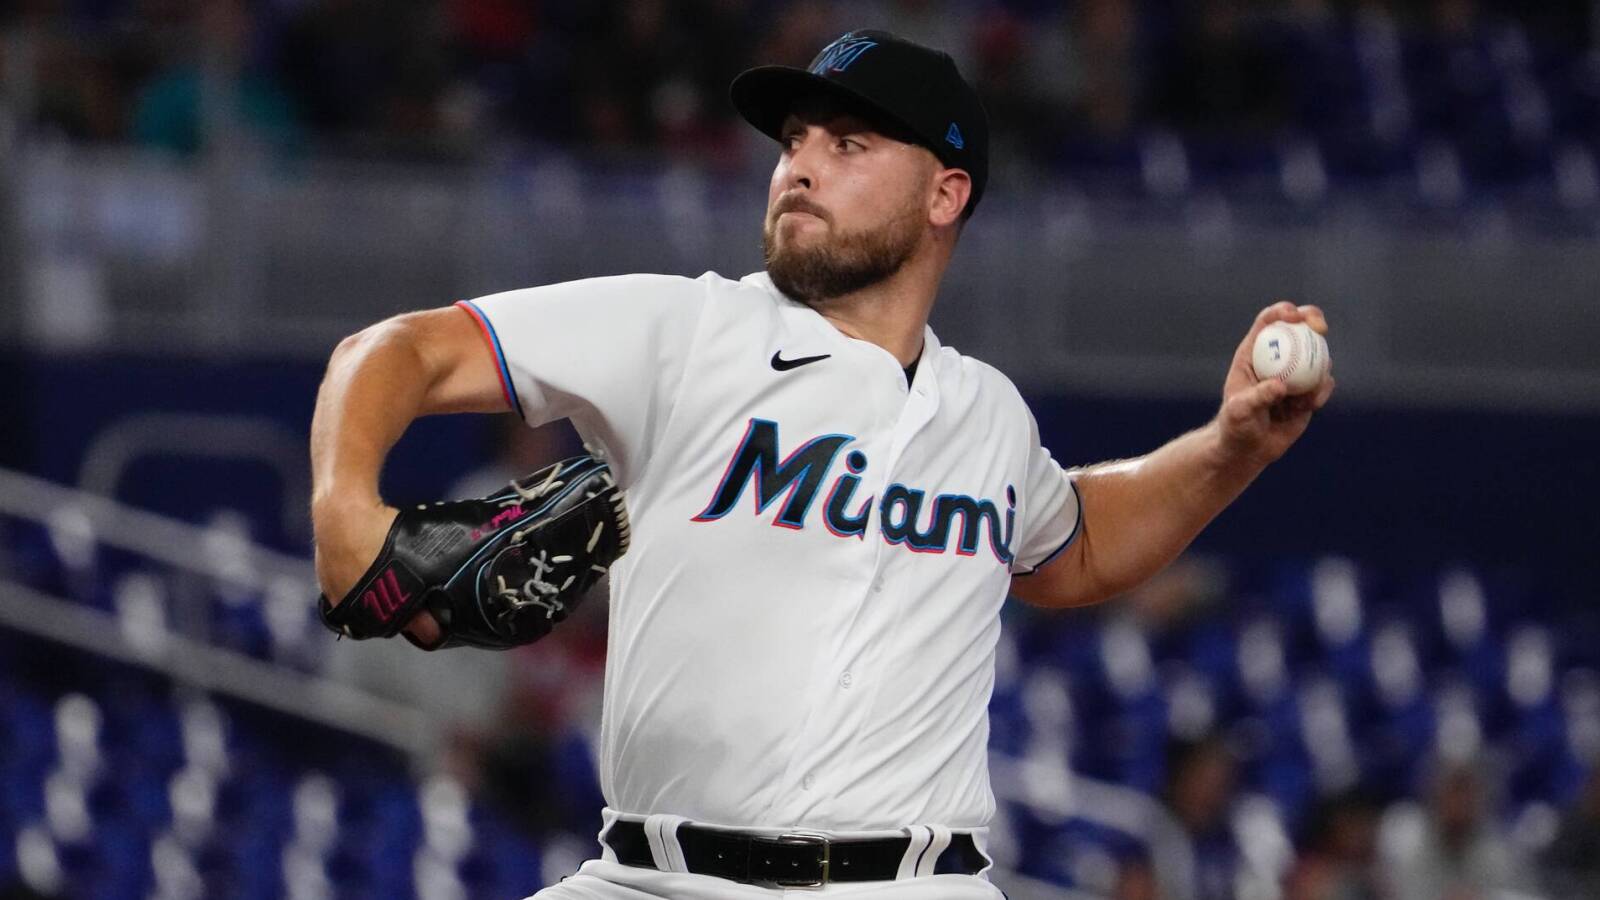 Marlins pitcher Daniel Castano takes line drive to head in scary moment